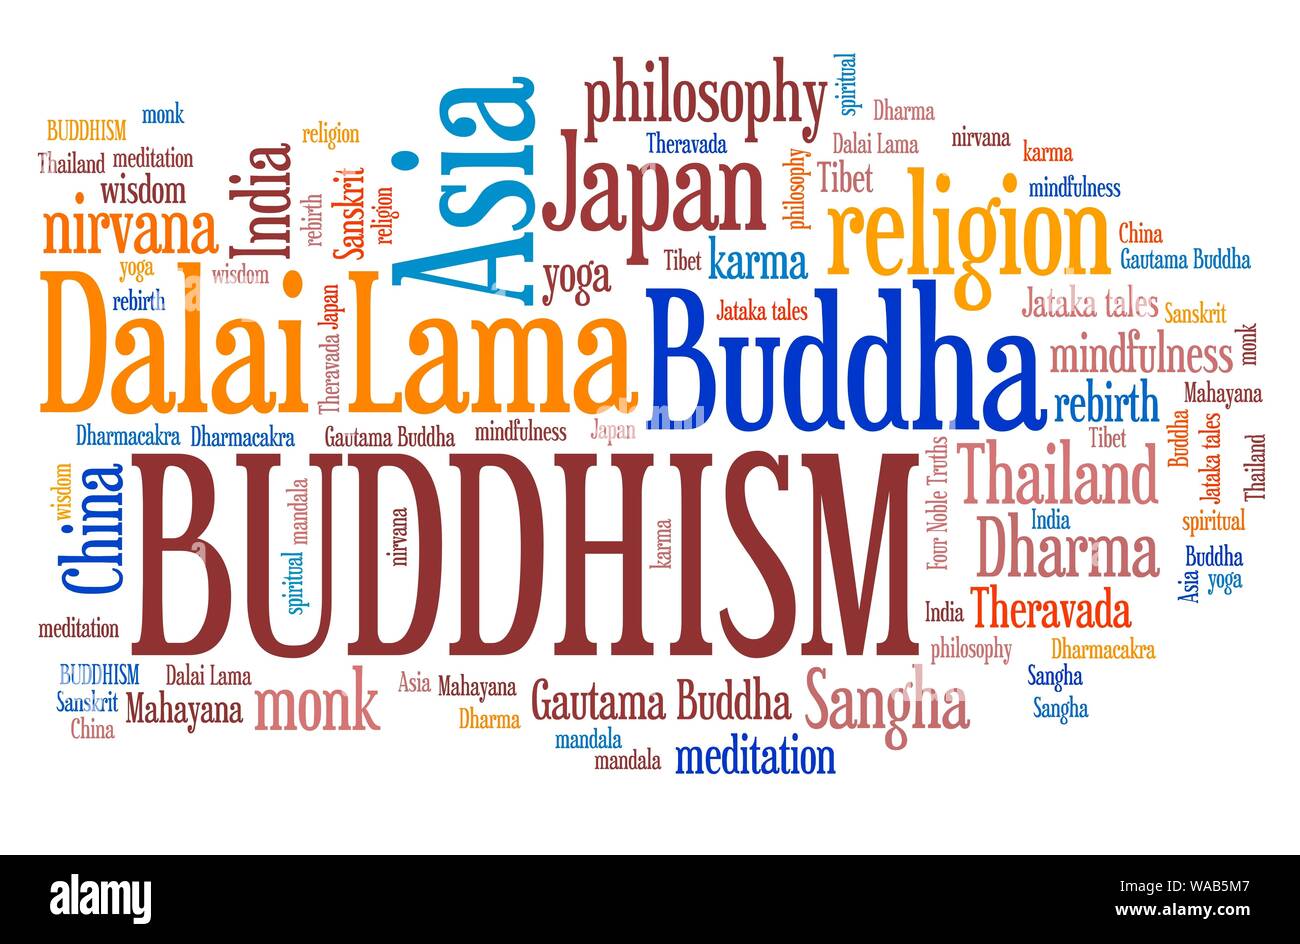 Buddhism - Asian religion and tradition. Word cloud sign. Stock Photo